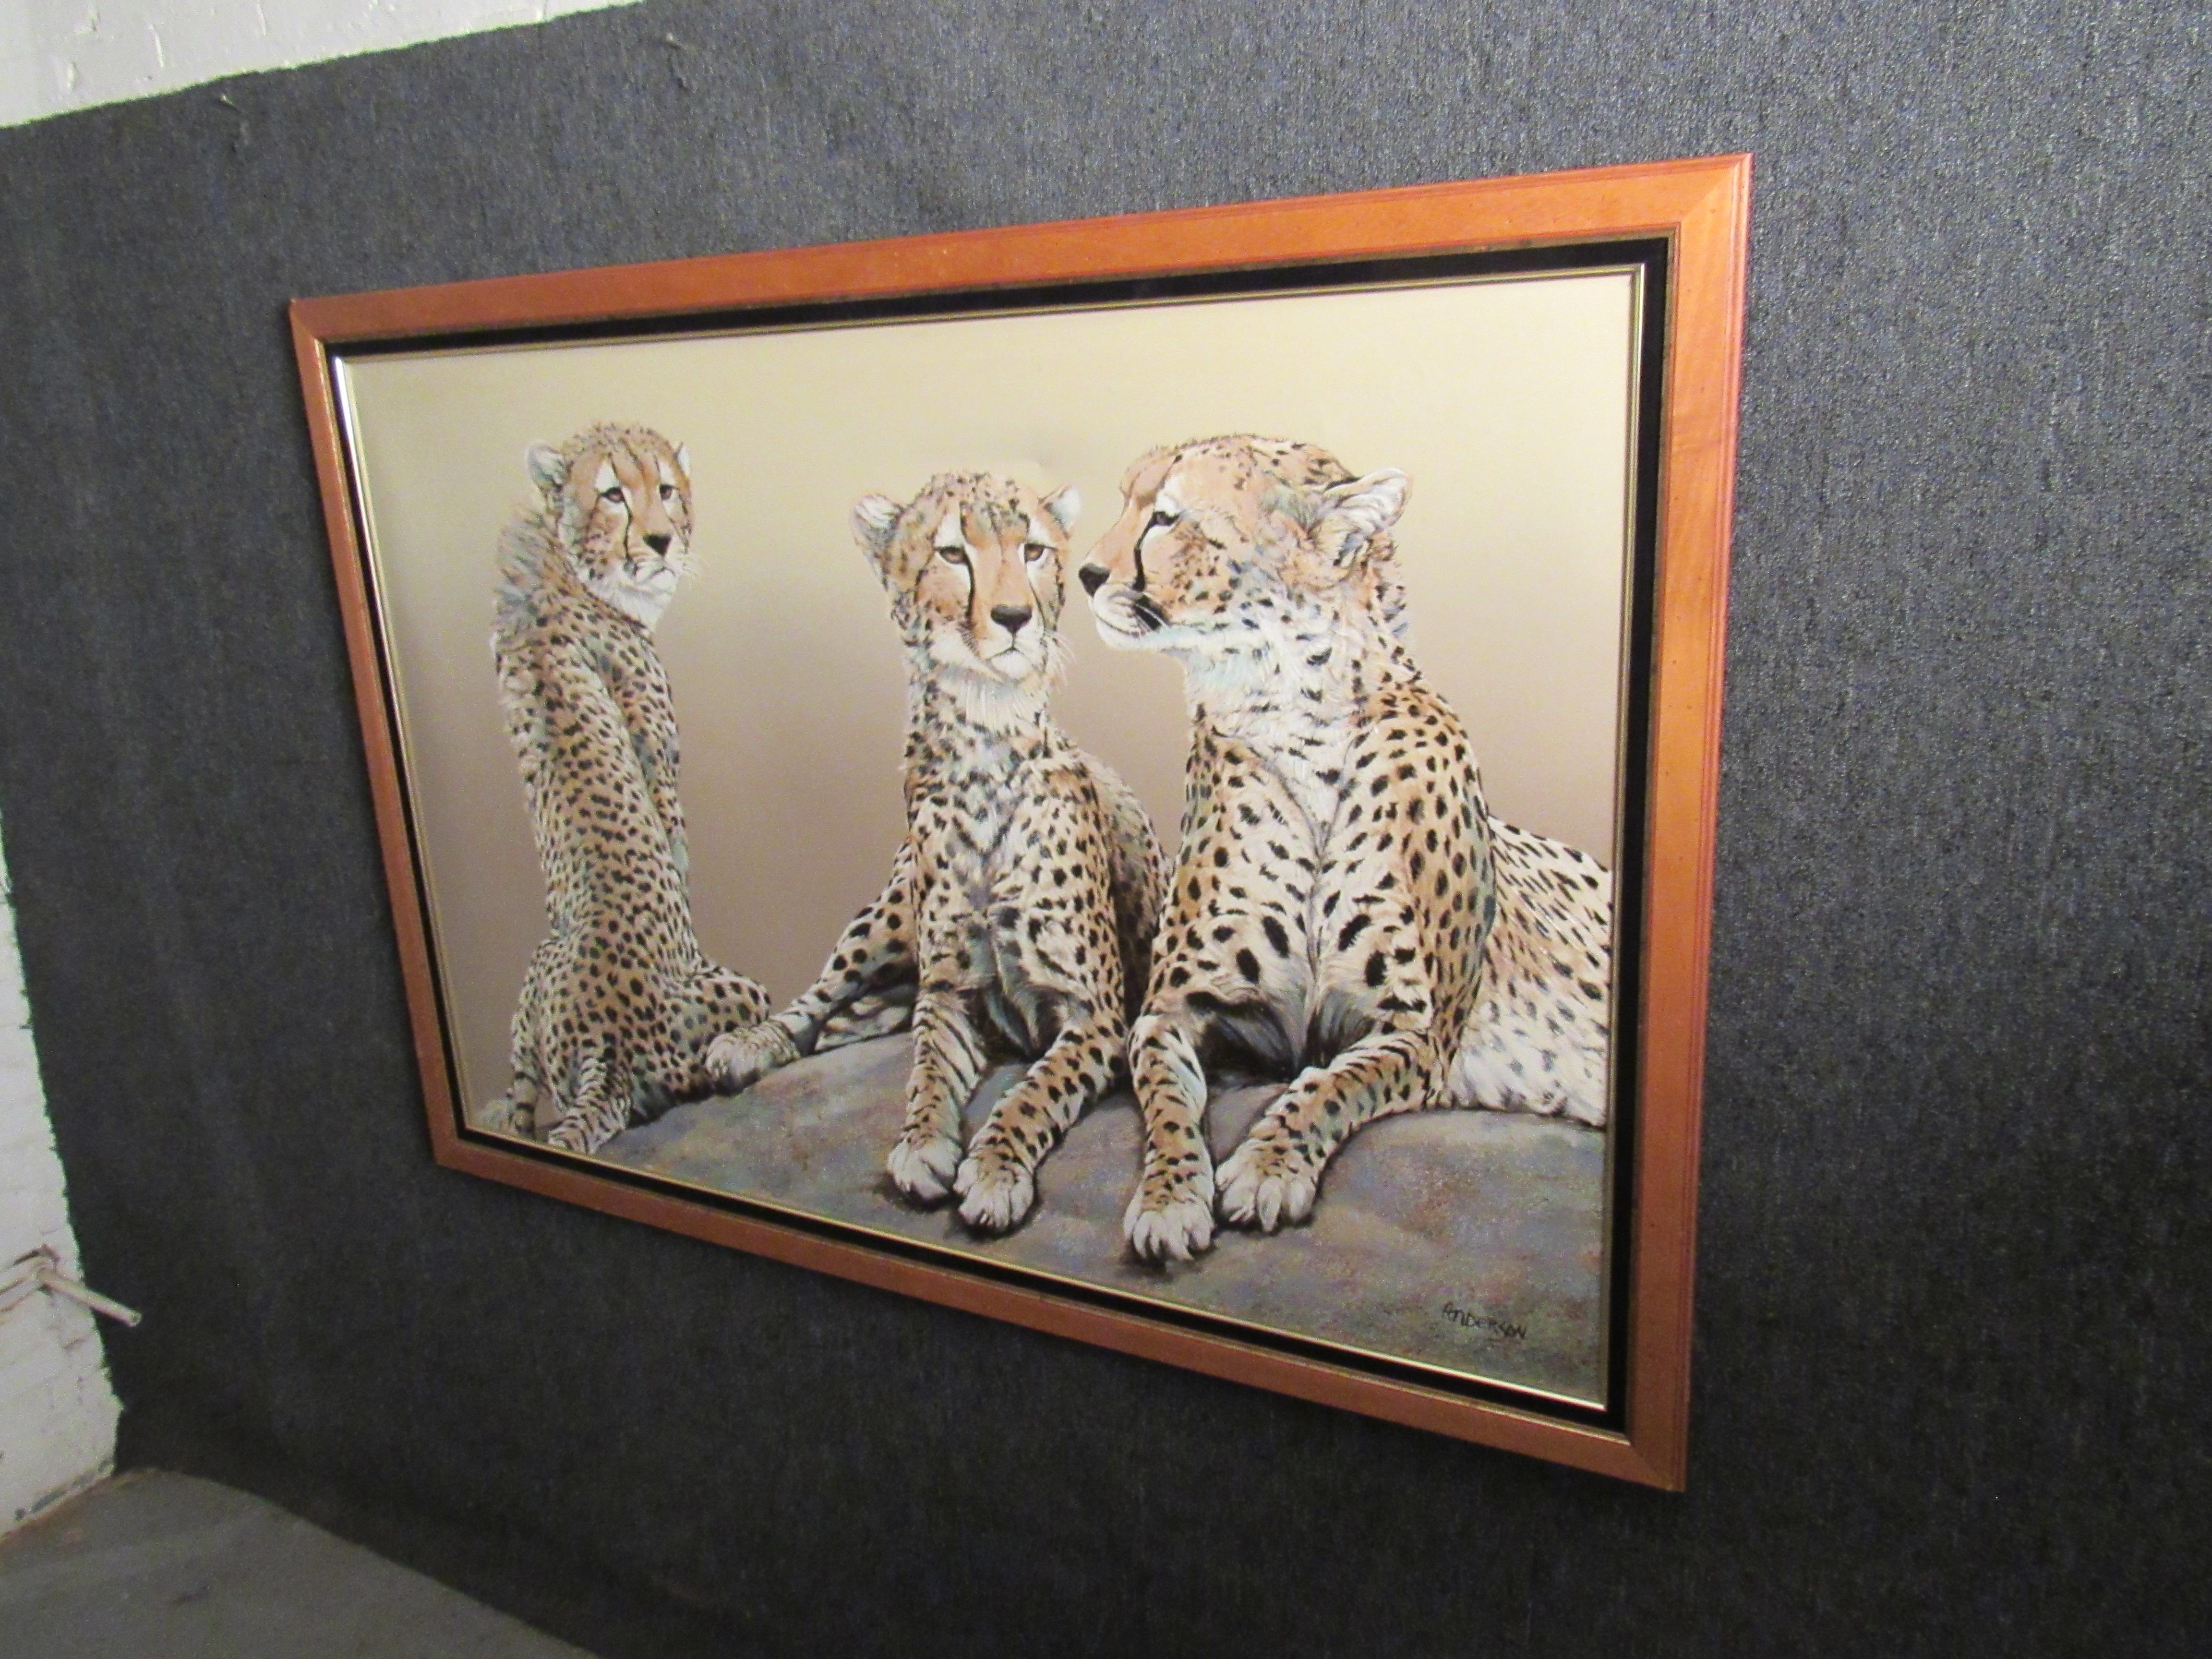 Turn your wall into a force of nature with this immersive, massive work of art. Created by mid-century American artist Anderson, it features an imposing coalition (or pack) of 3 big cat cheetahs rendered in beautiful oil paints on genuine canvas